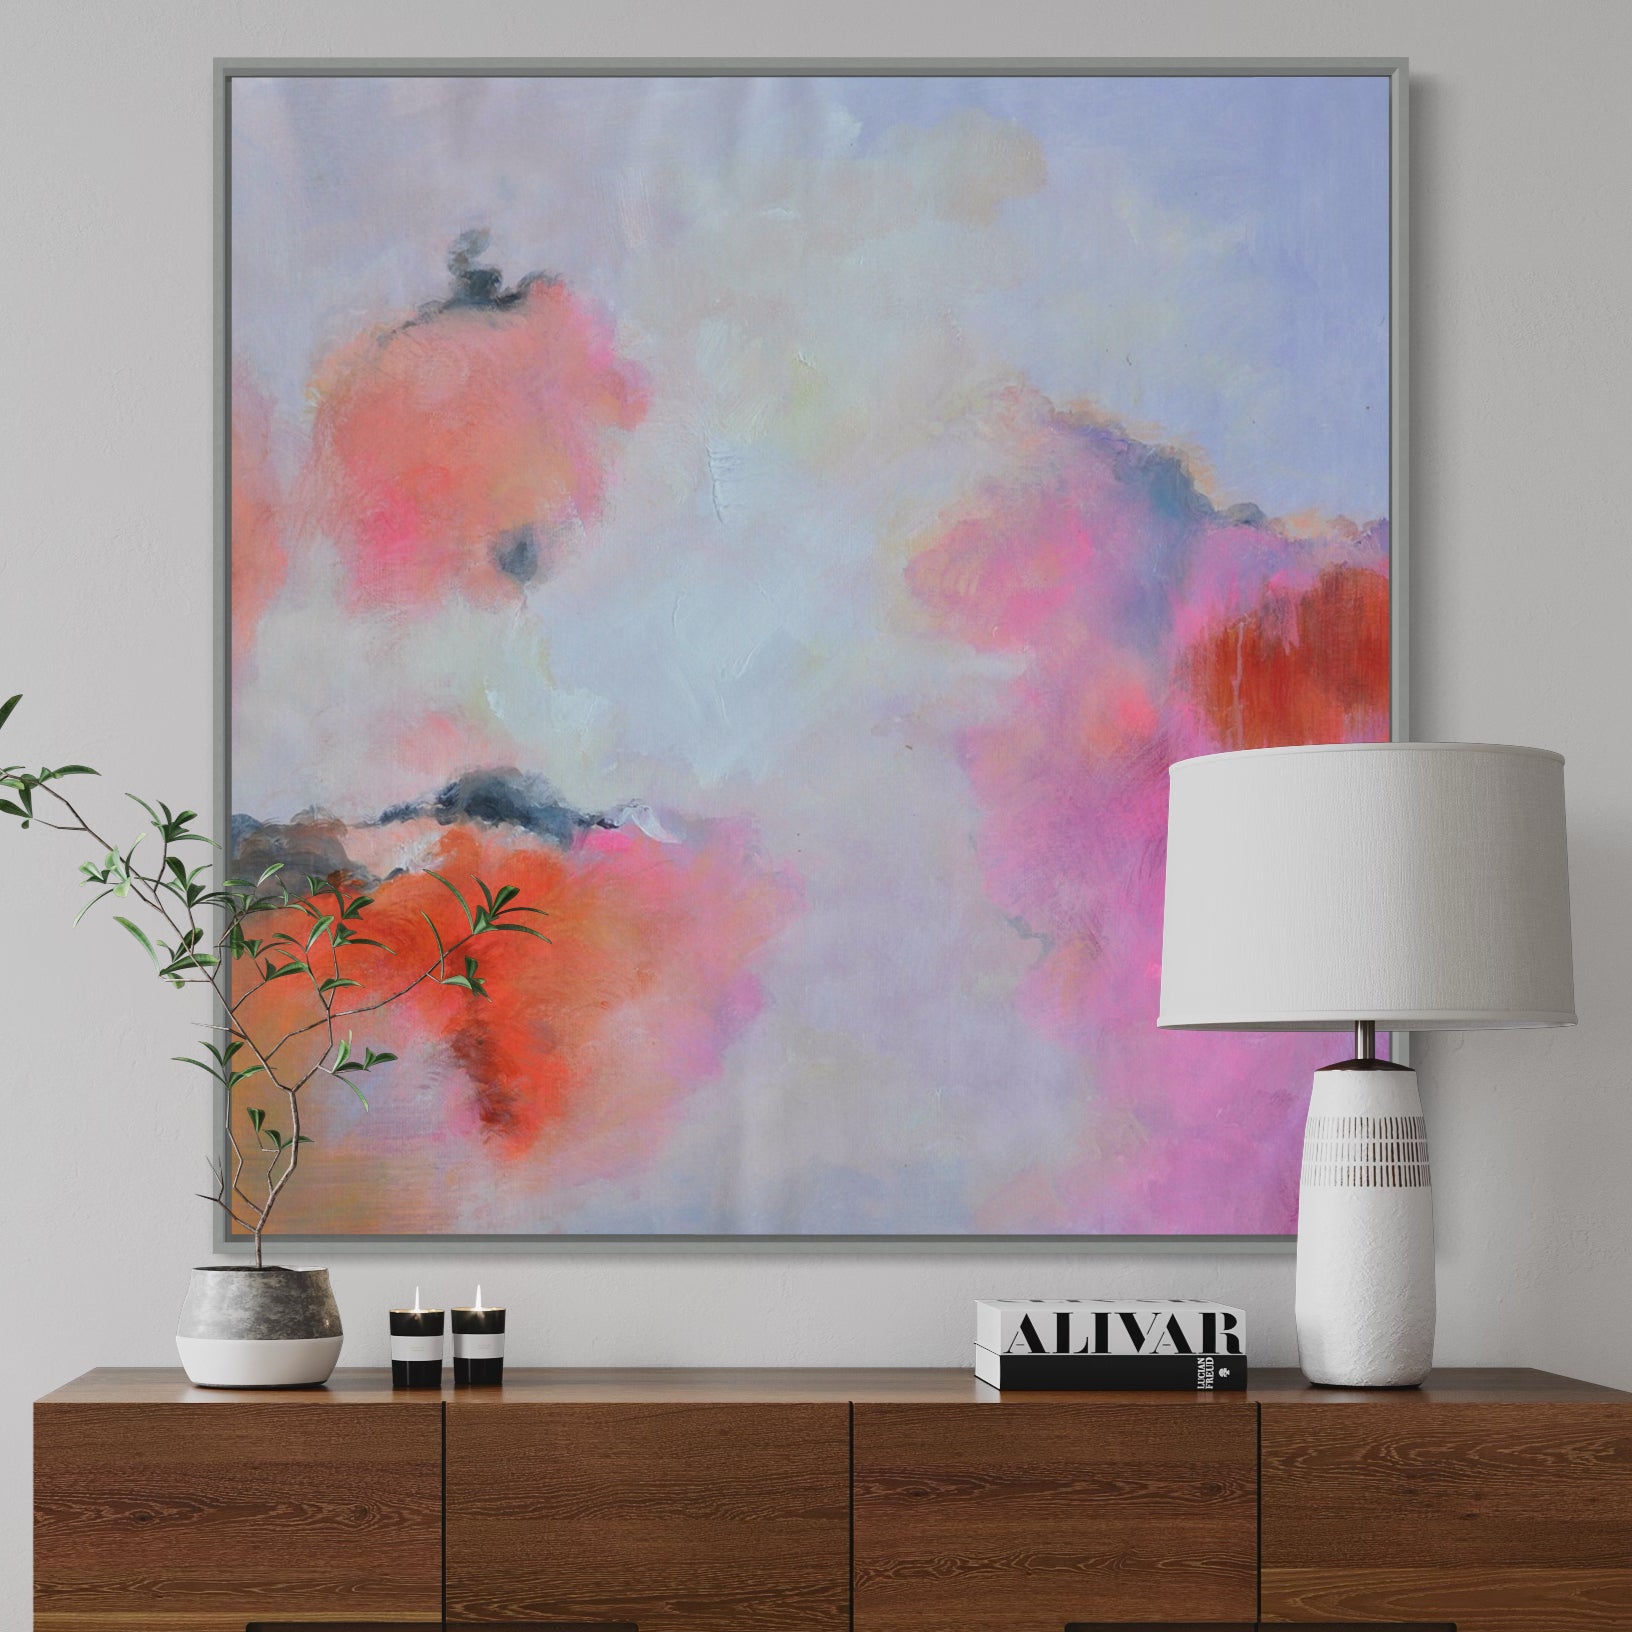 Cotton Candy, Black And Golden / 100x100cm